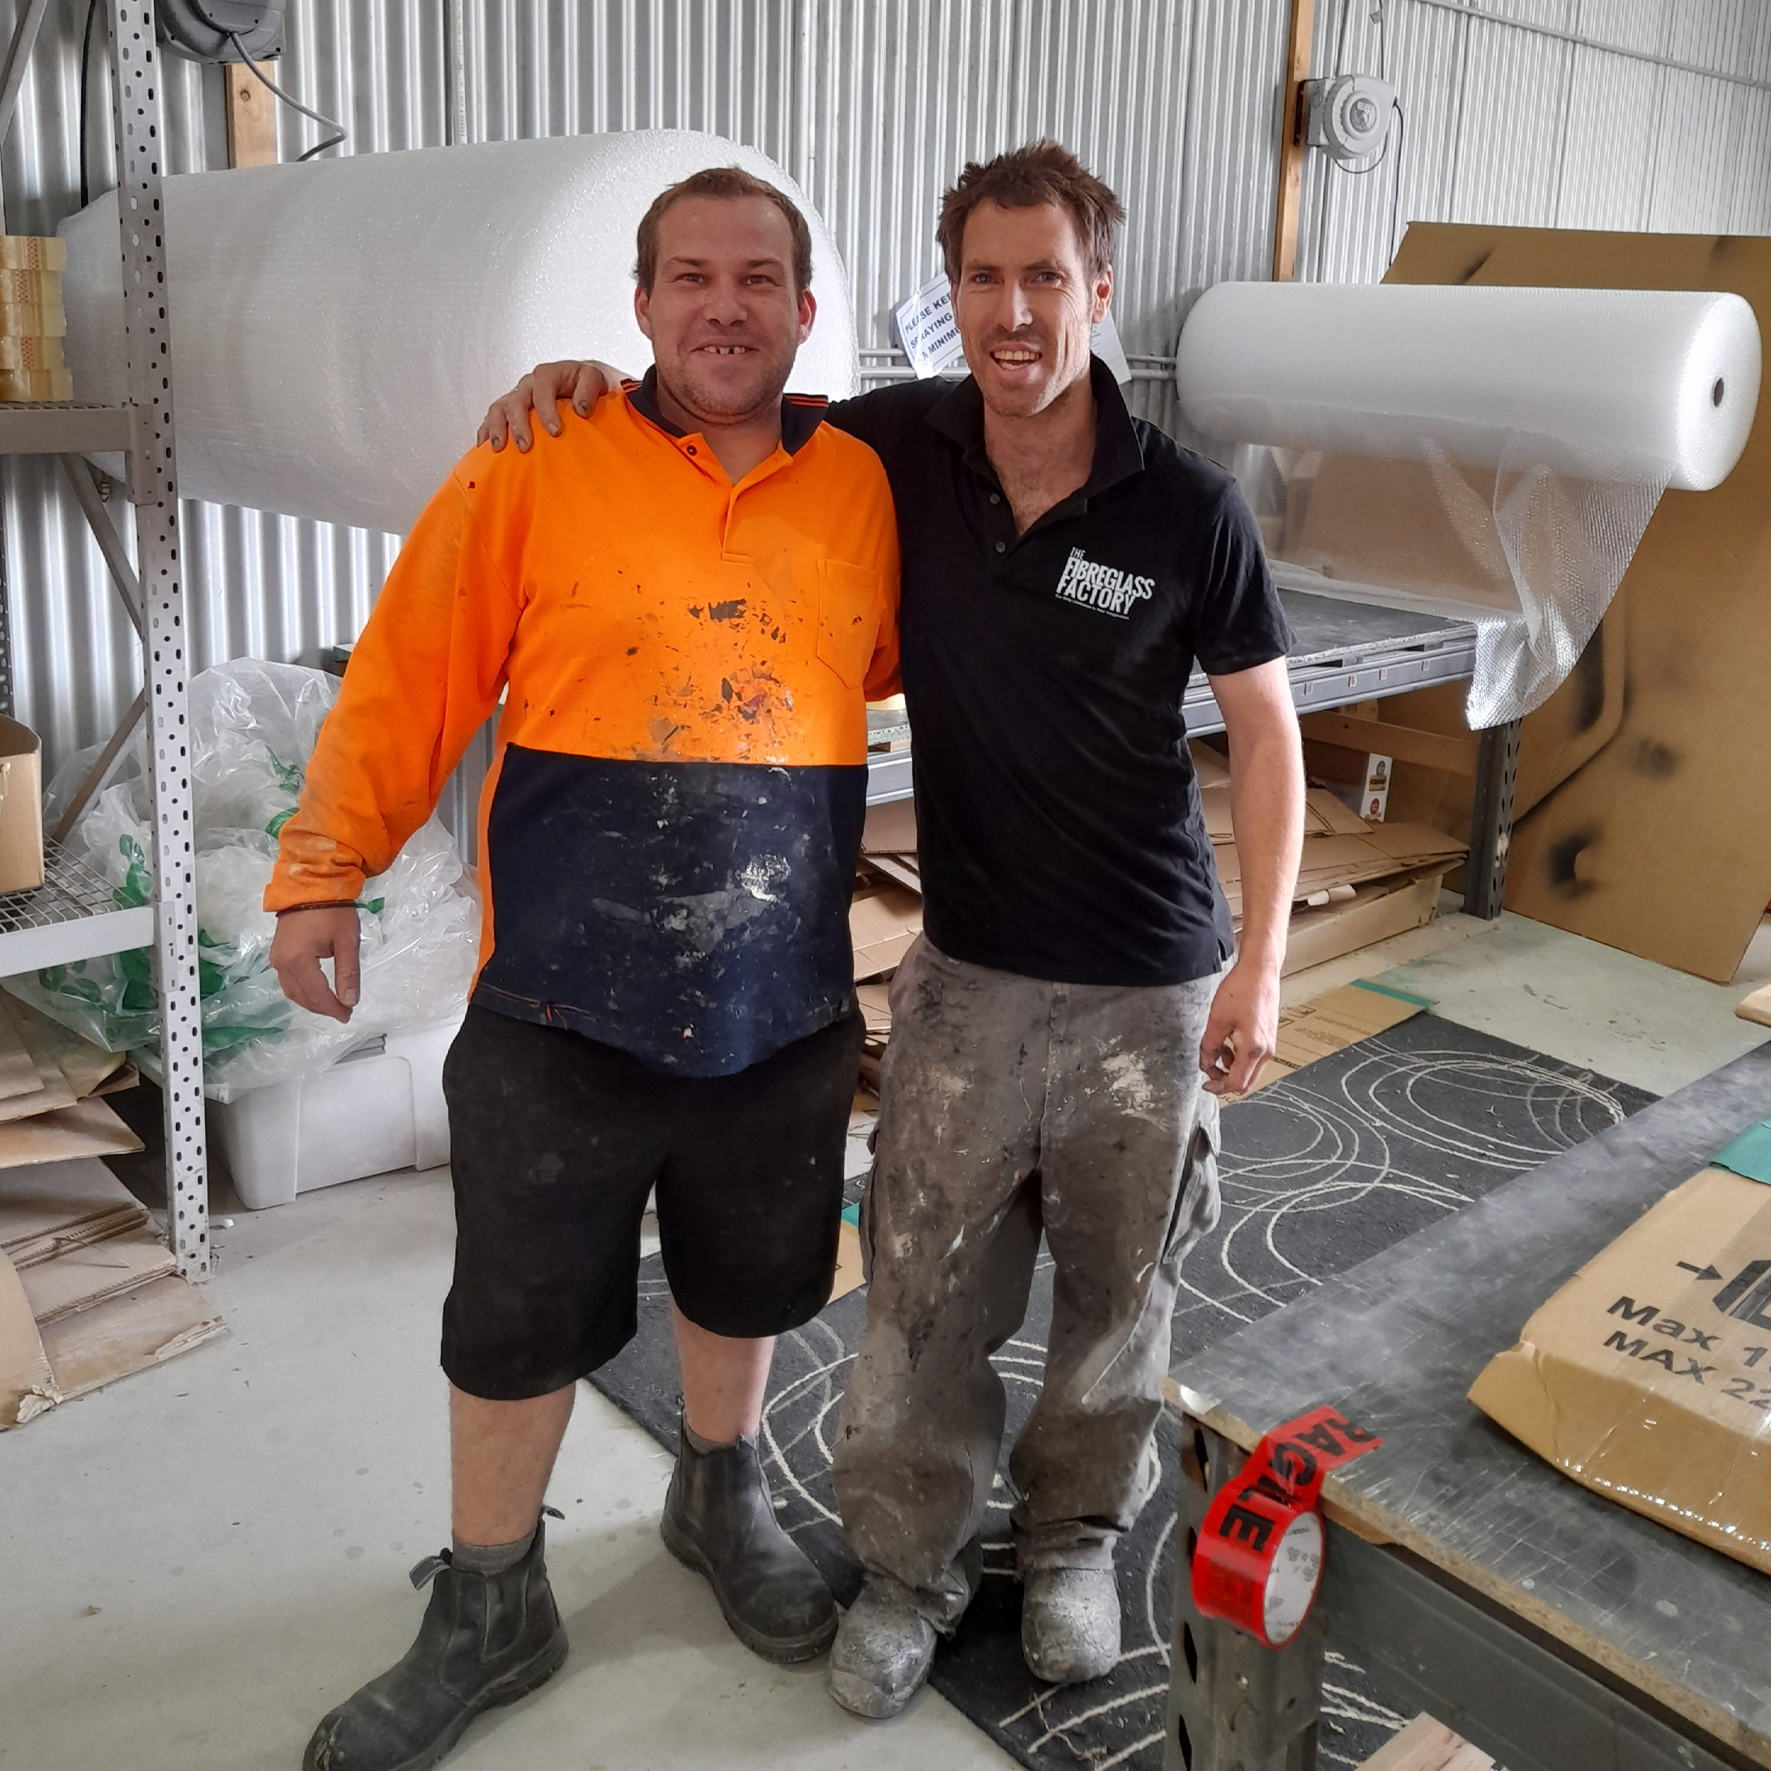 Sustainable employment helps Luke move into his own home